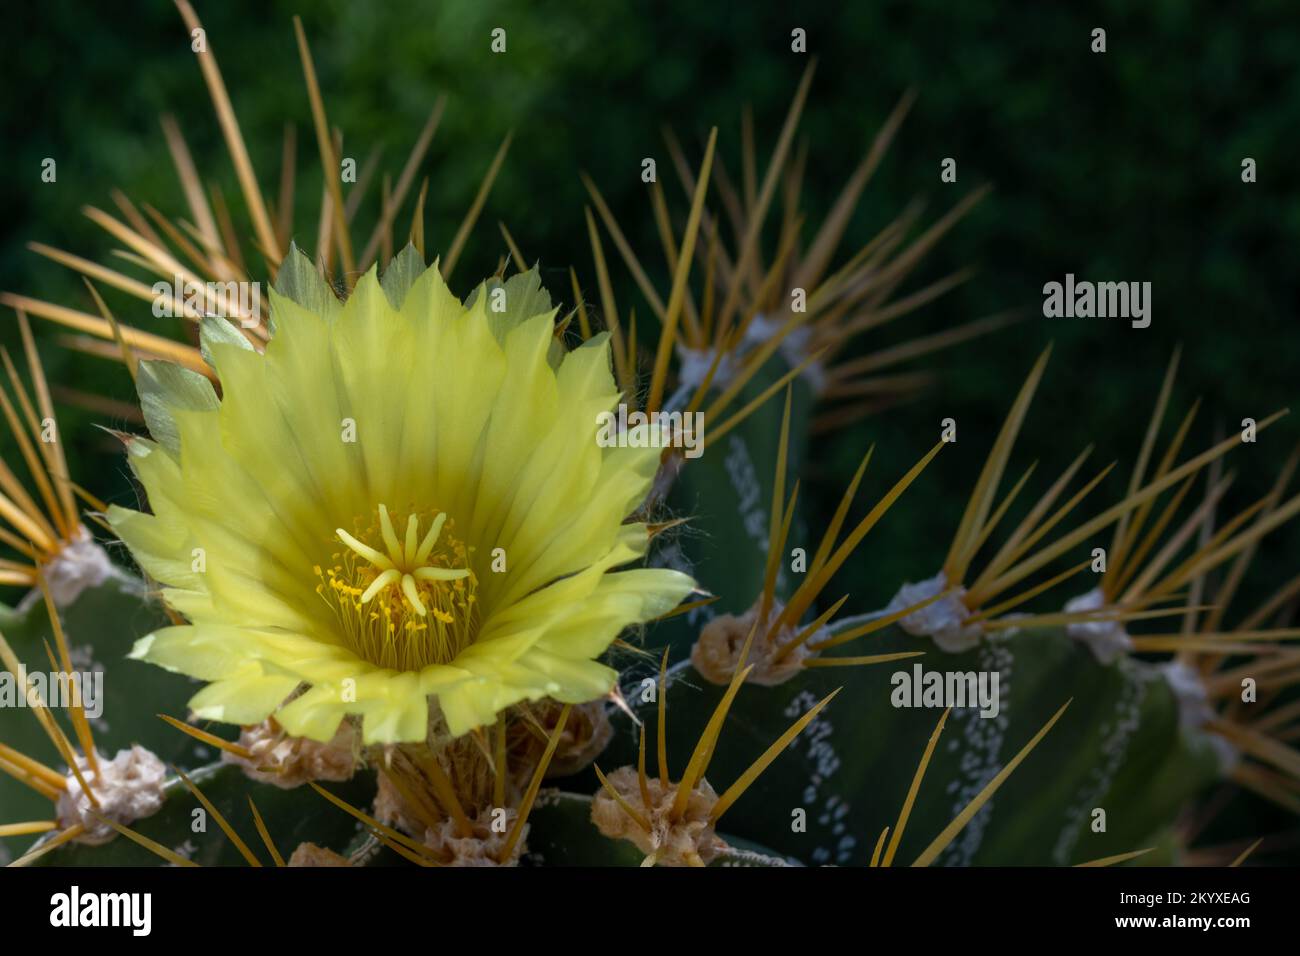 Yellow flower of a star cactus (Astrophytum ornatum) between lights and shadows in the garden Stock Photo